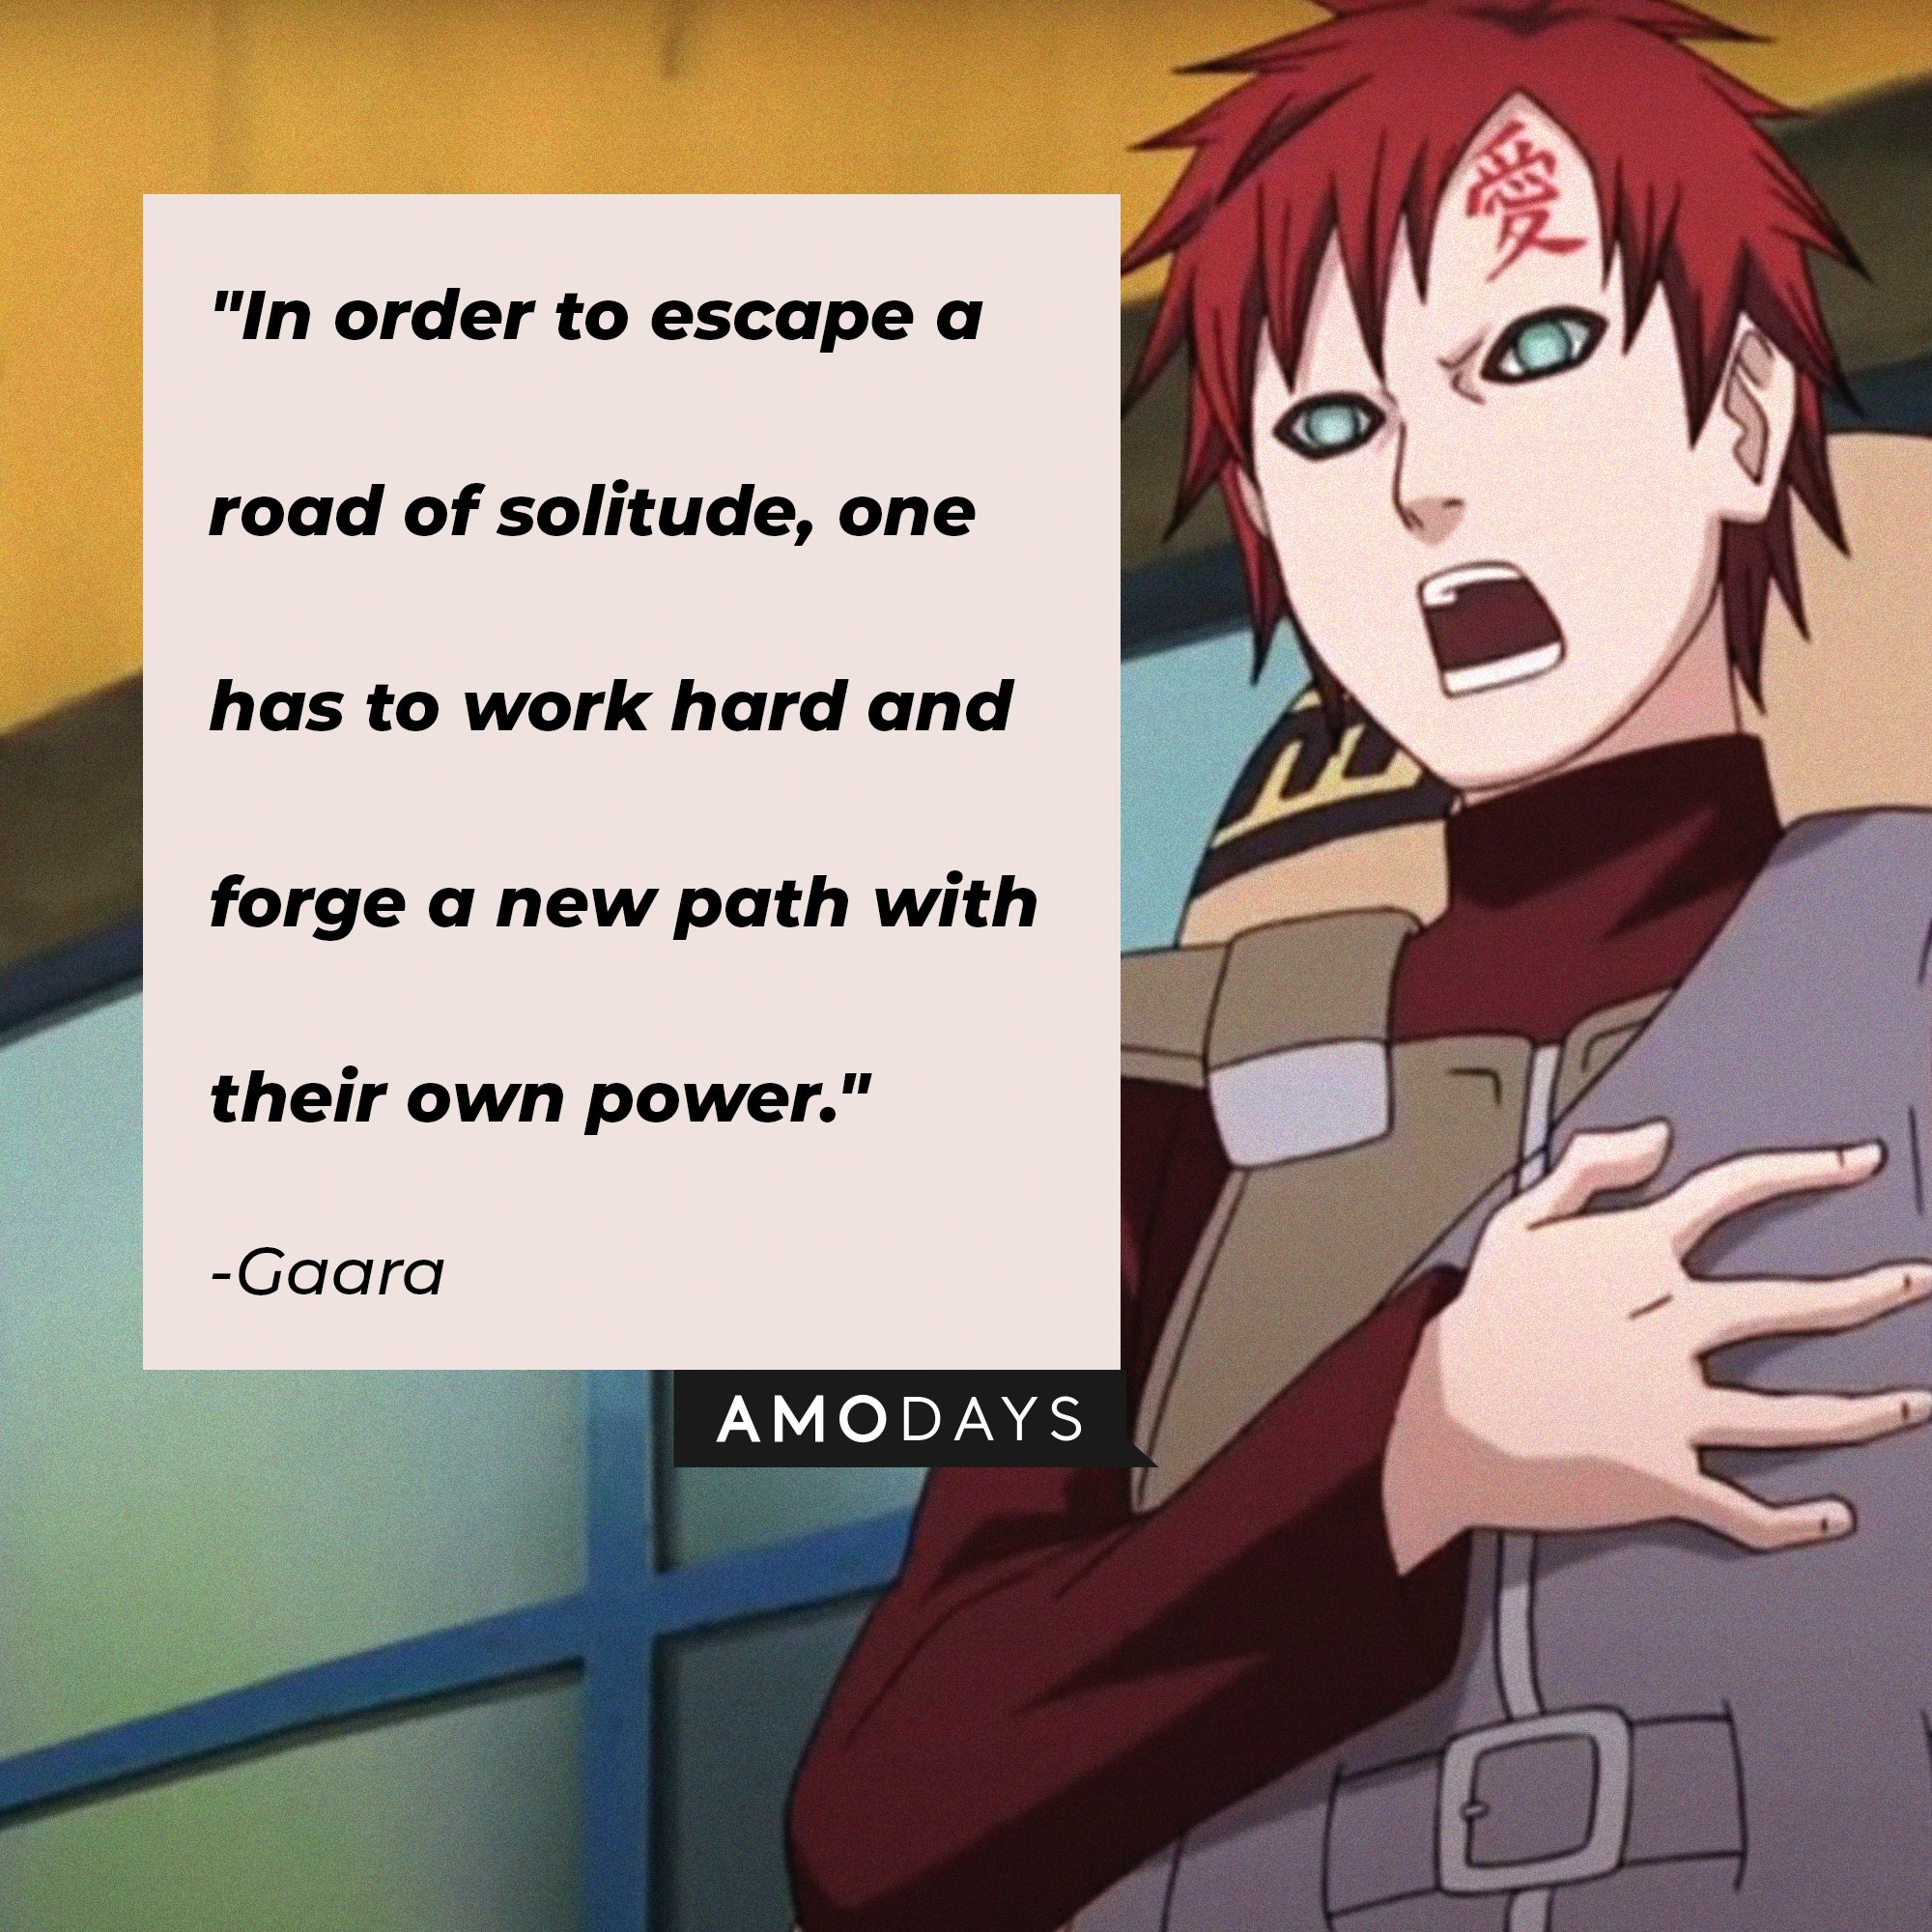 Gaara's quote: "In order to escape a road of solitude, one has to work hard and forge a new path with their own power."  | Image: AmoDays